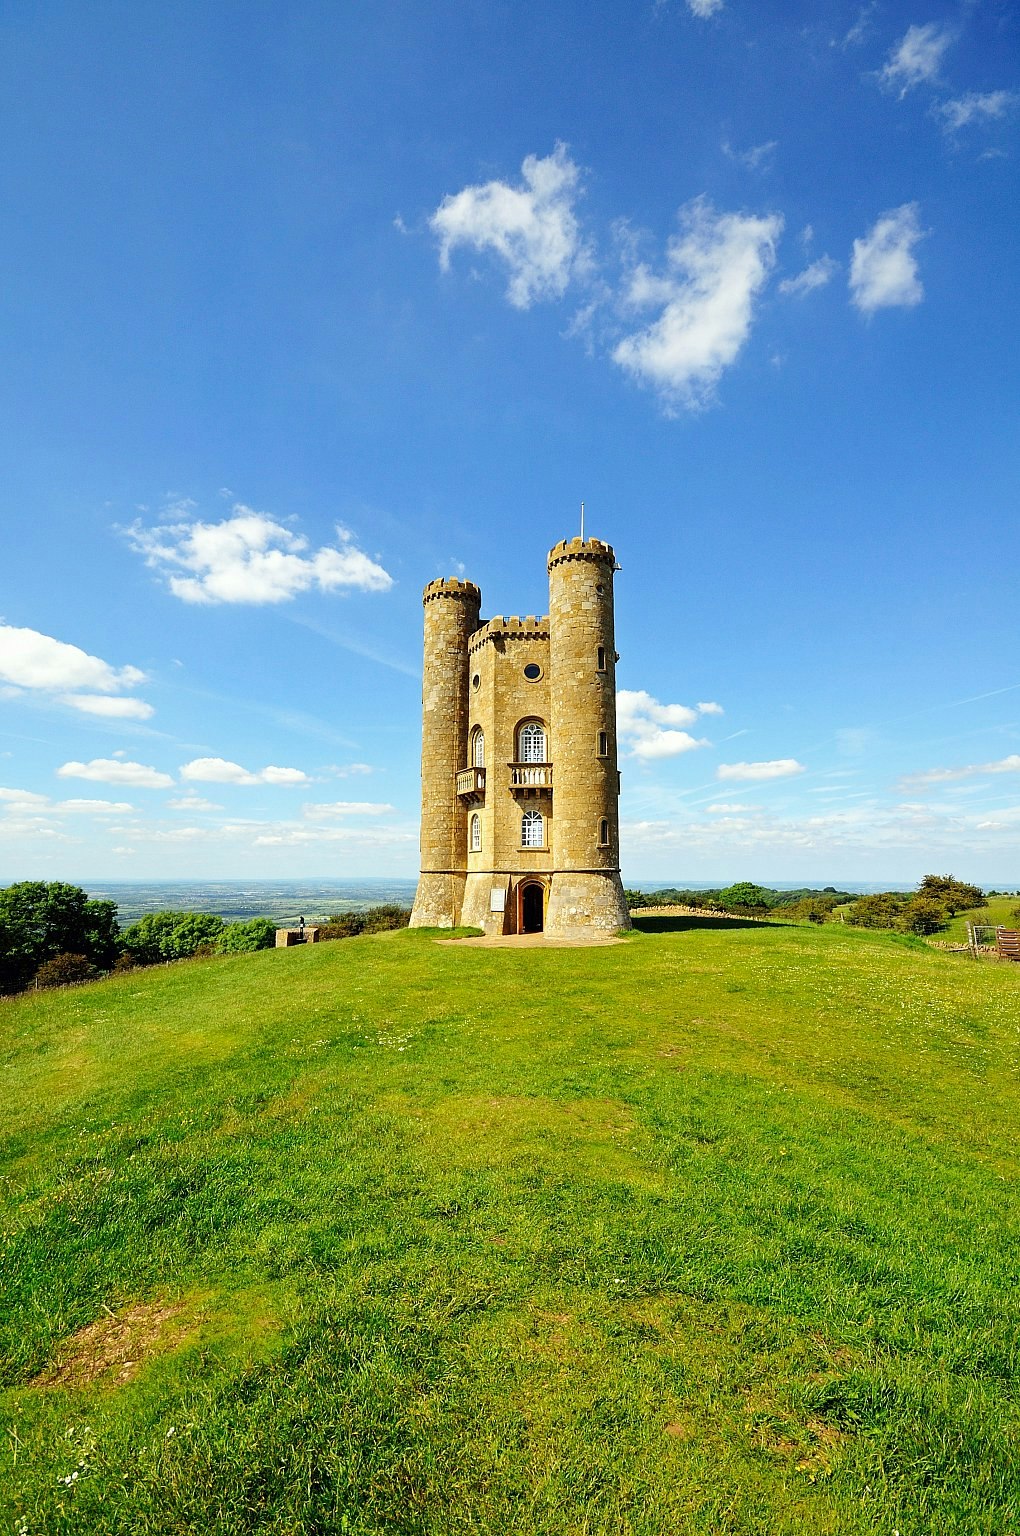 A turreted stone tower on a hilltop on a sunny day with panoramic views over the countryside beyond.